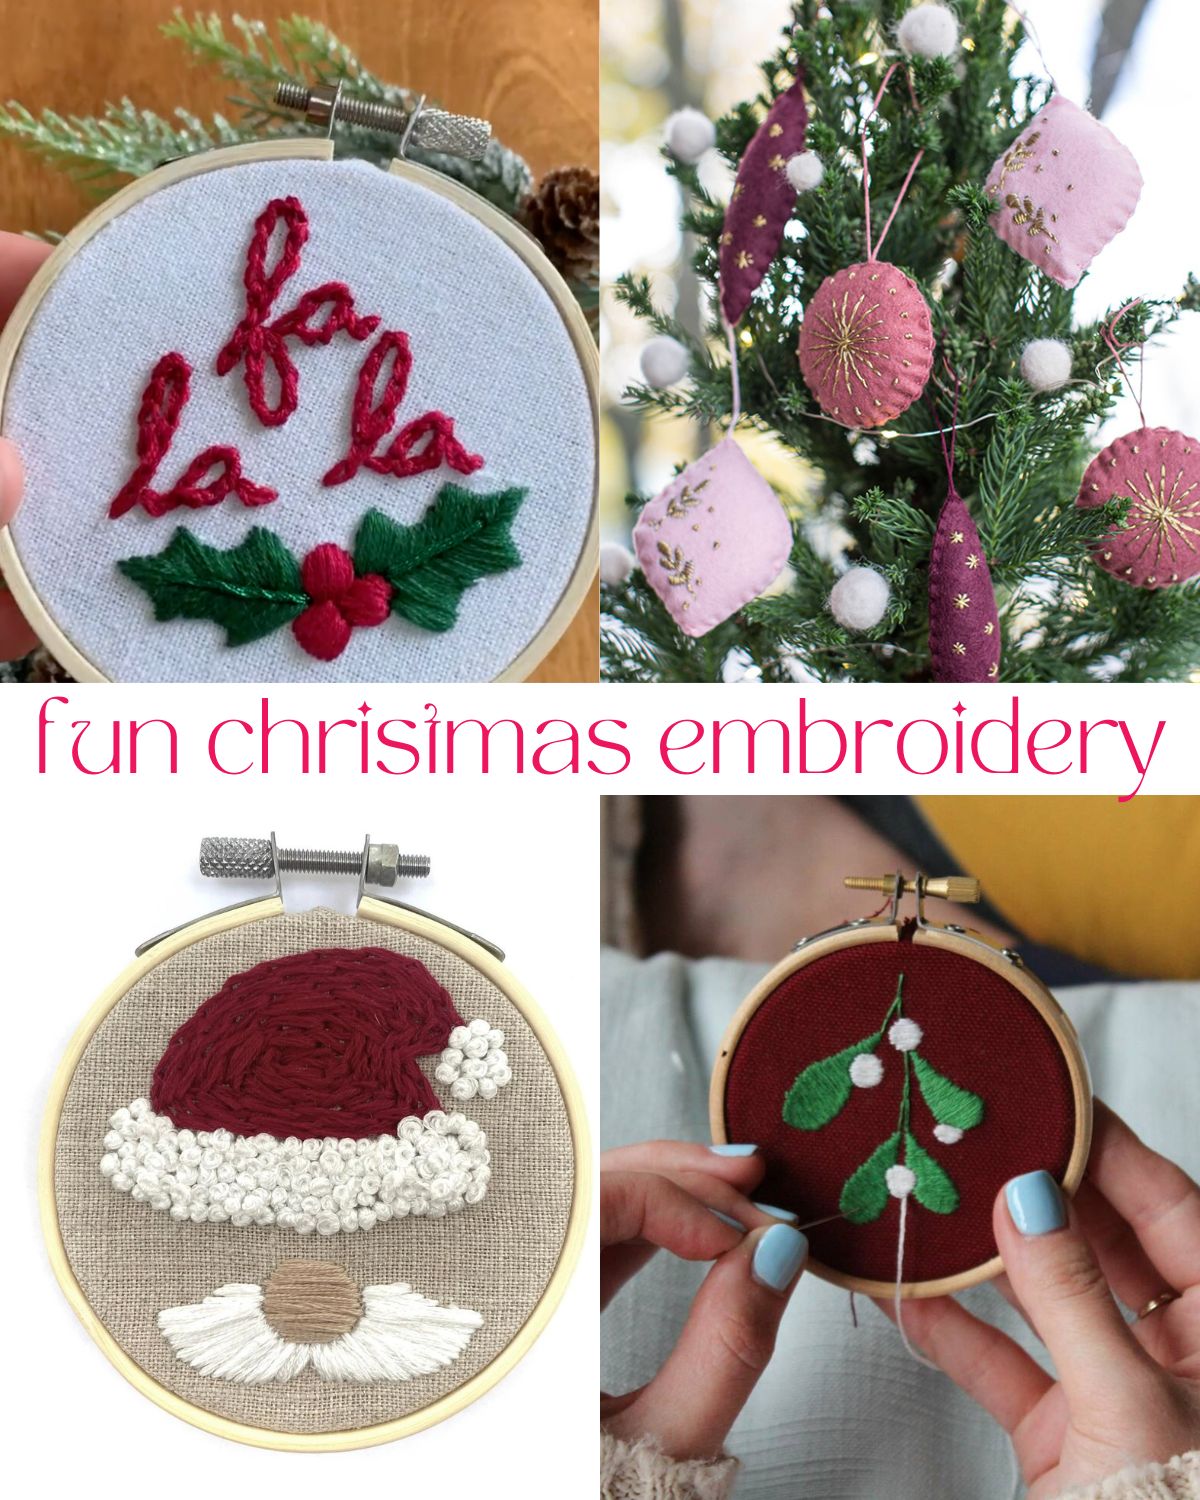 Four fun embroidery designs for Christmas